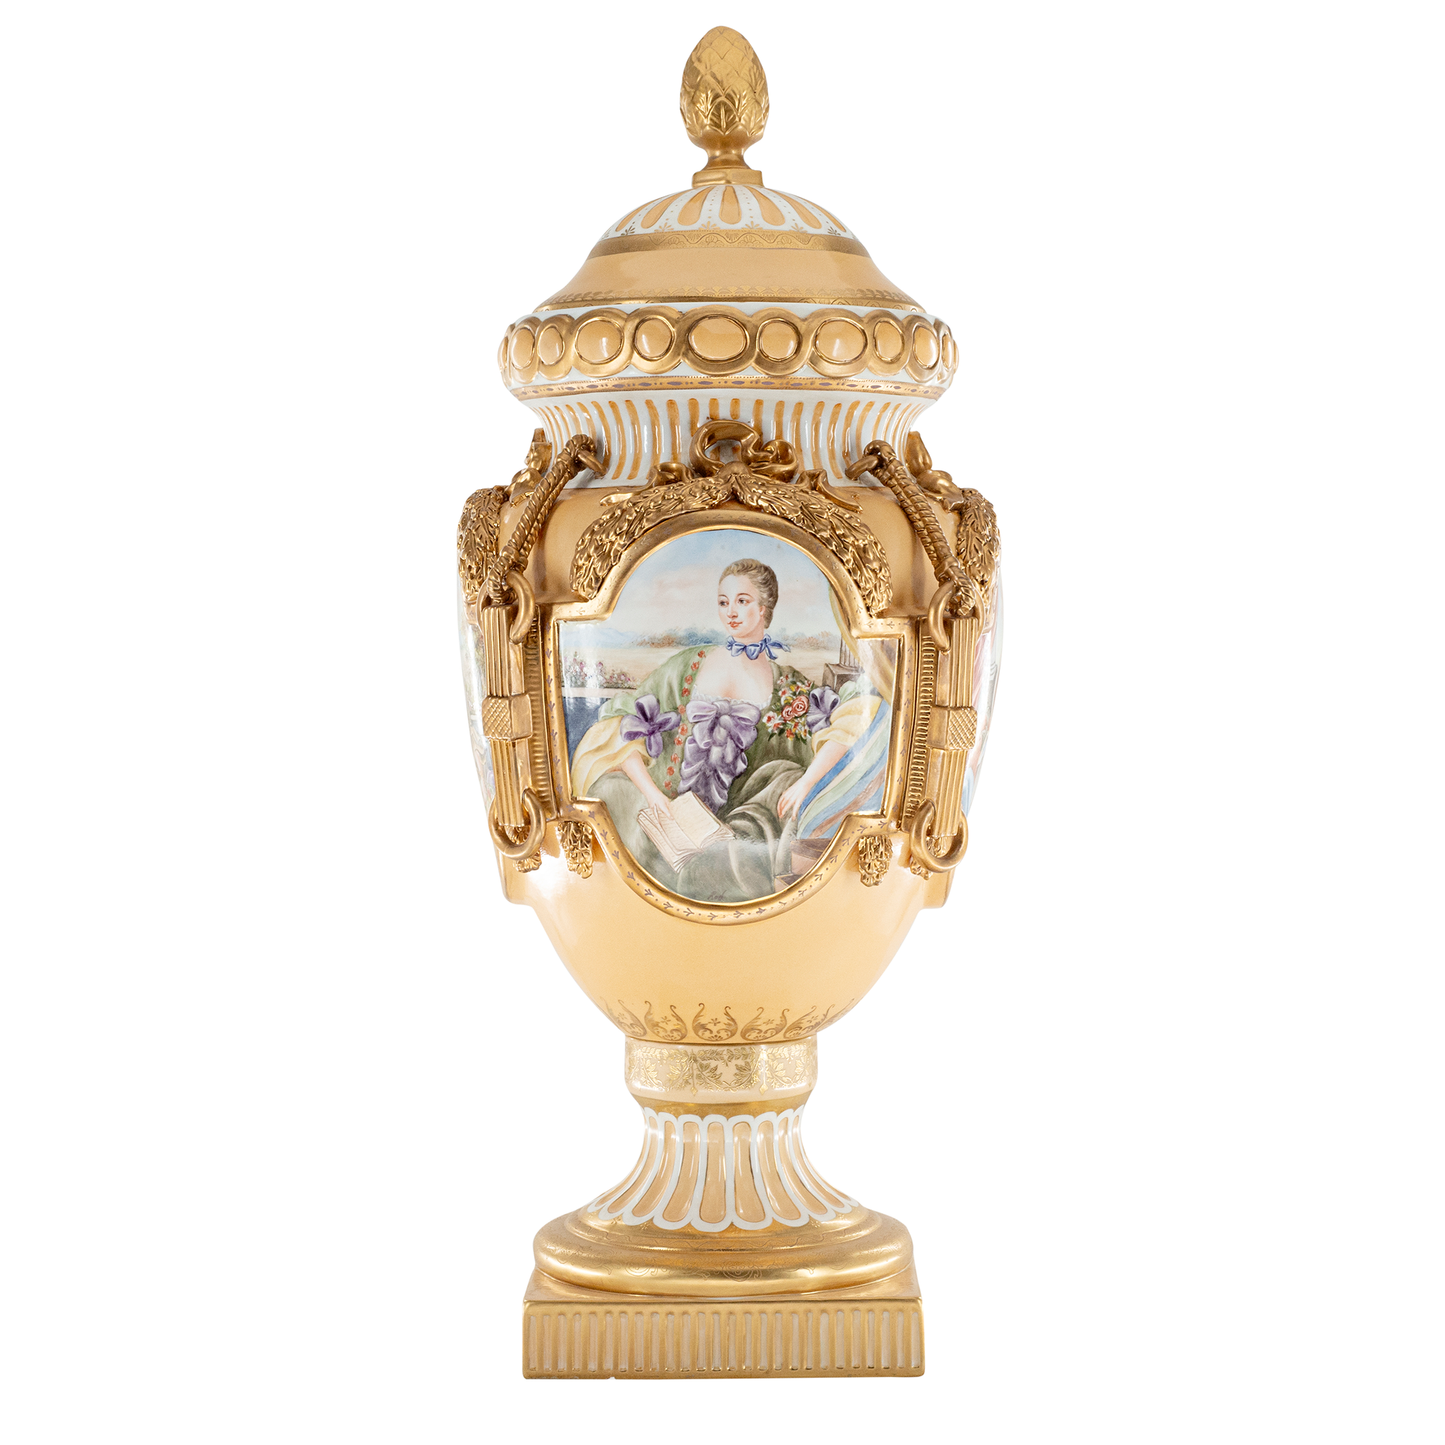 Hand Painted Rococo Style Porcelain Vase